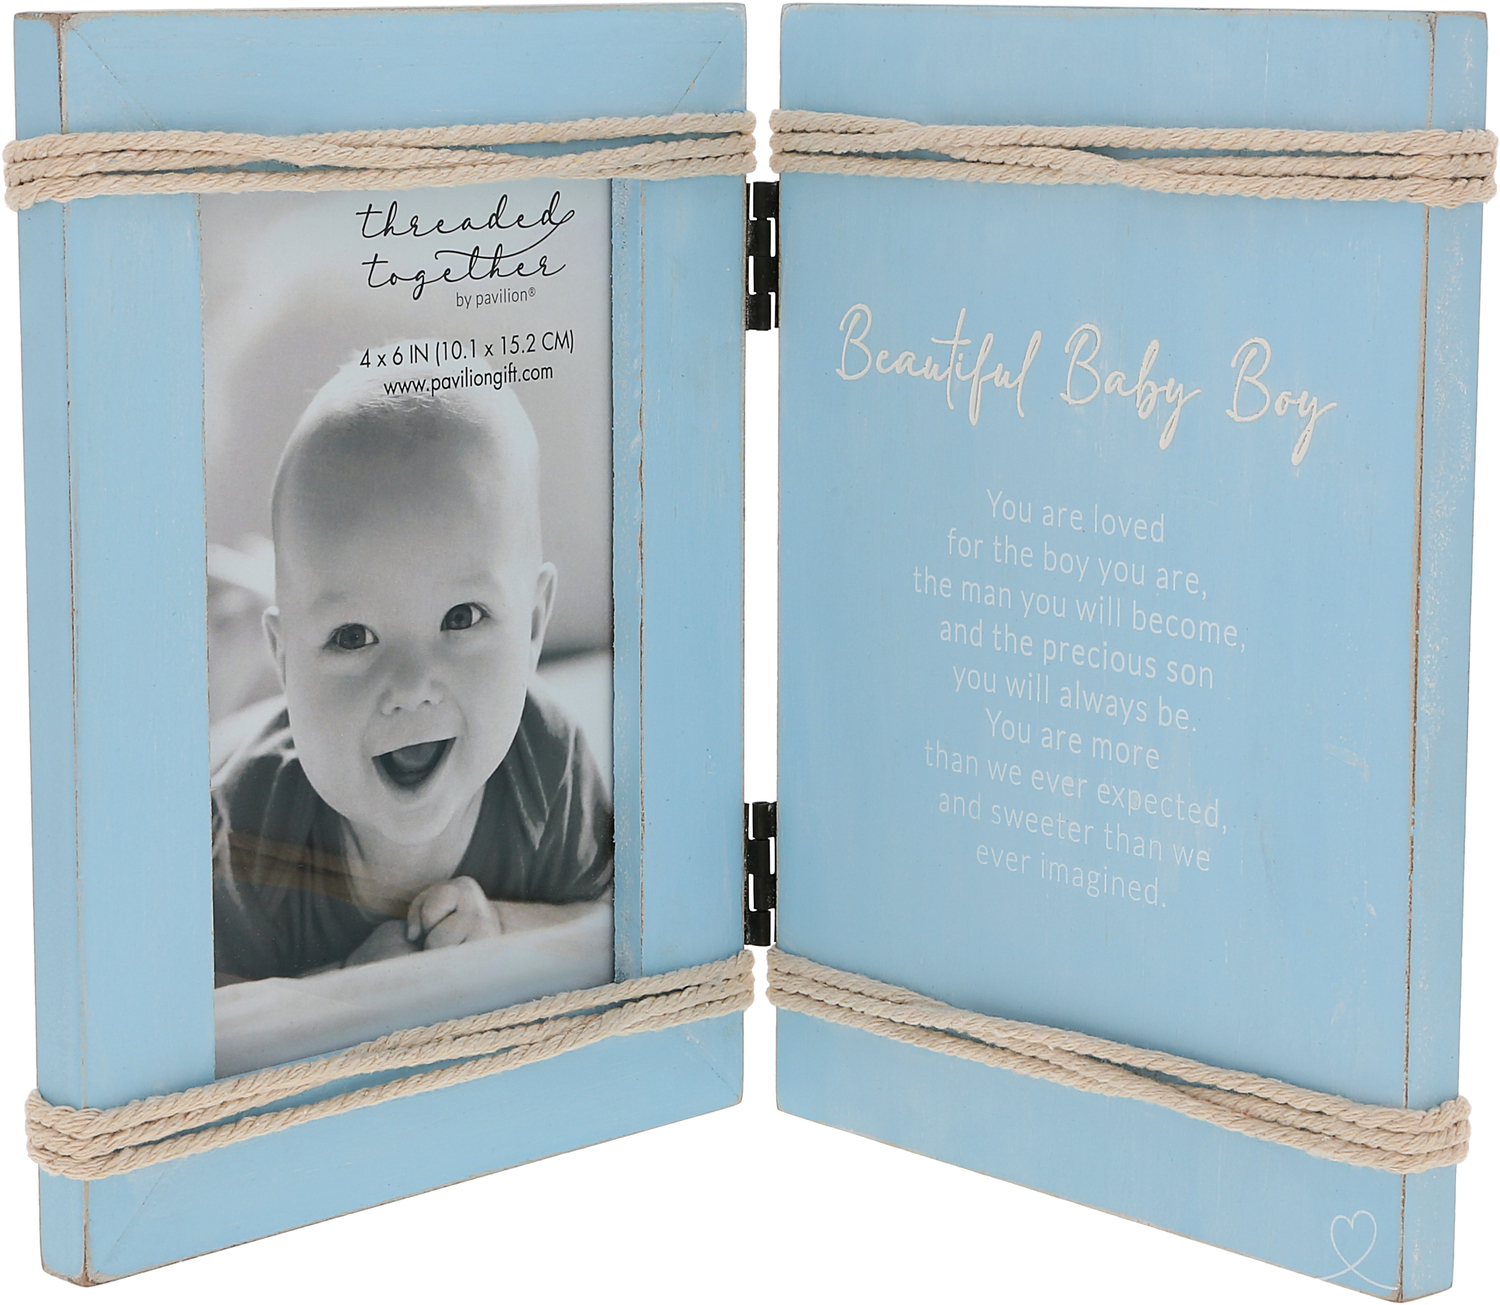 Beautiful Baby Boy by Threaded Together - Beautiful Baby Boy - 5.5" x 7.5" Hinged Sentiment Frame
(Holds 4" x 6" Photo)